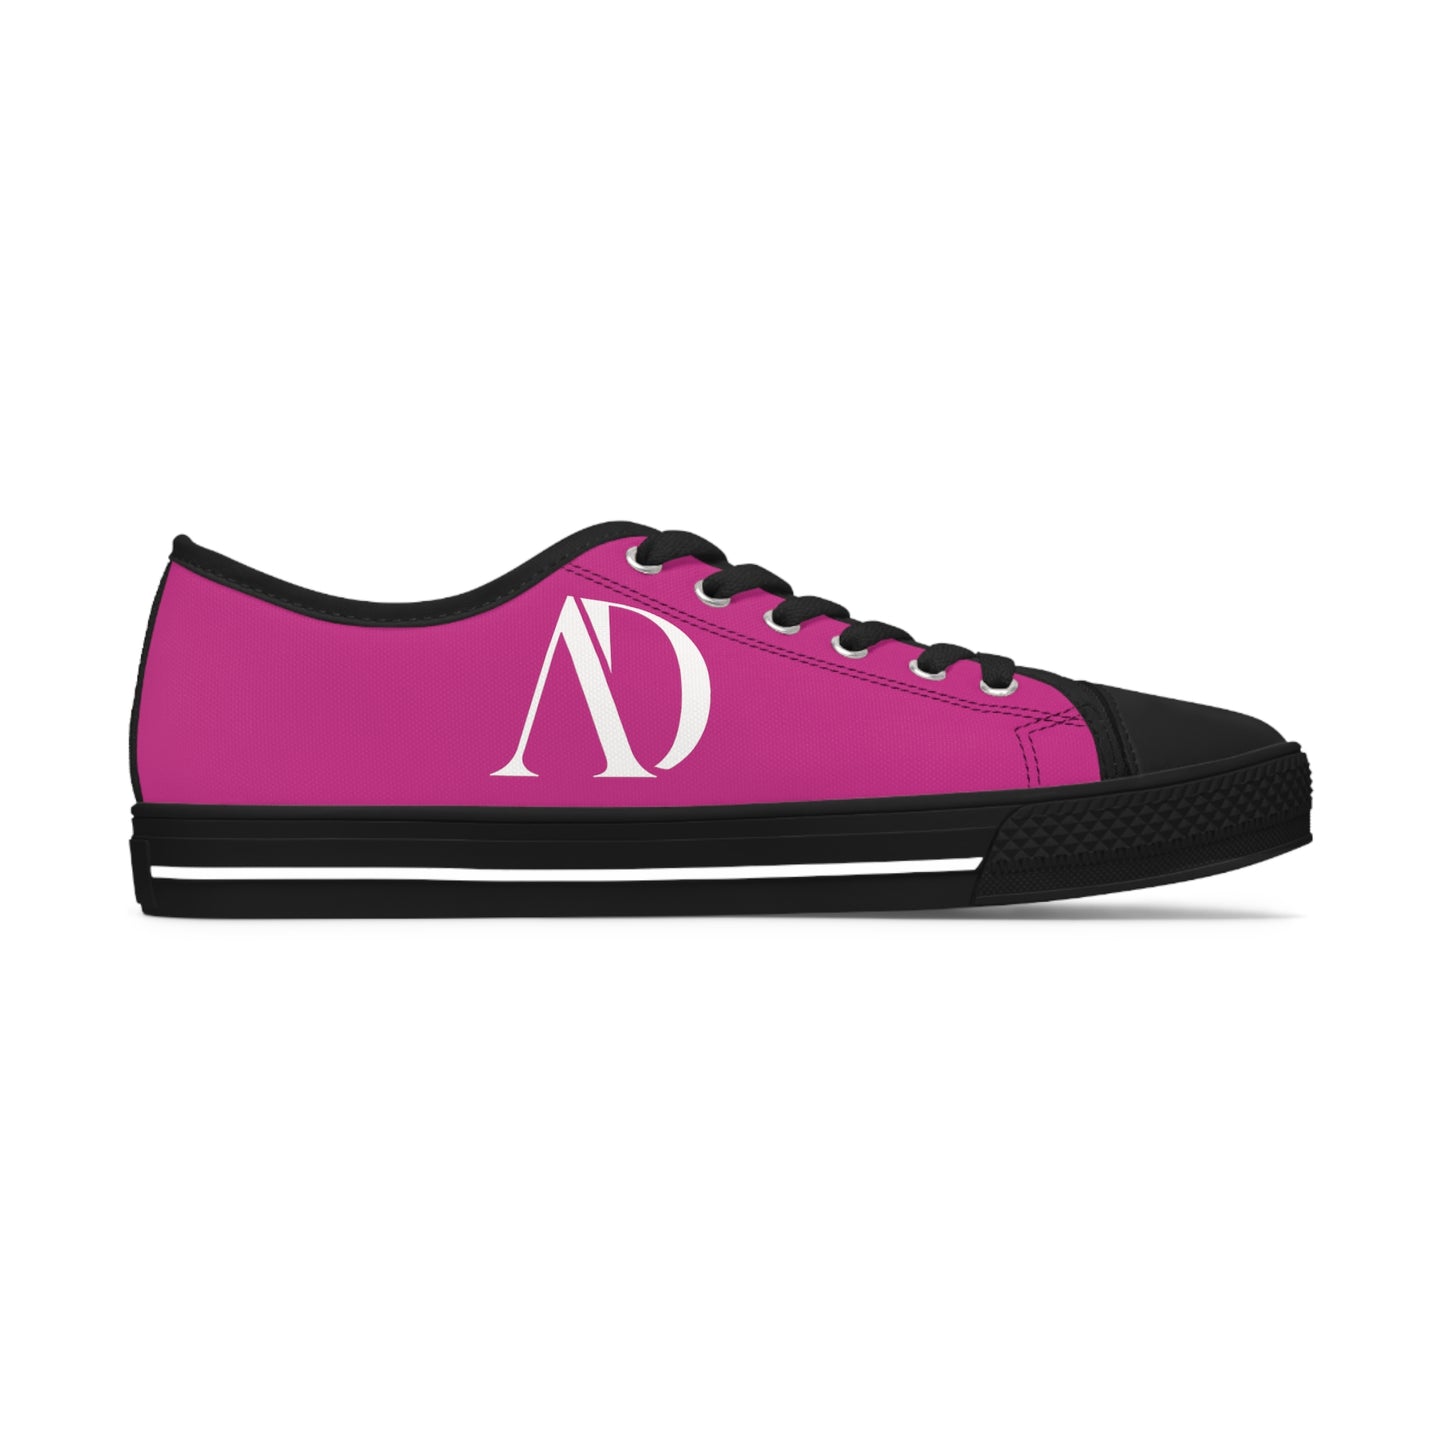 DeCrypt De Classic™ Pink on Black Fusion Low Top Sneakers For Women